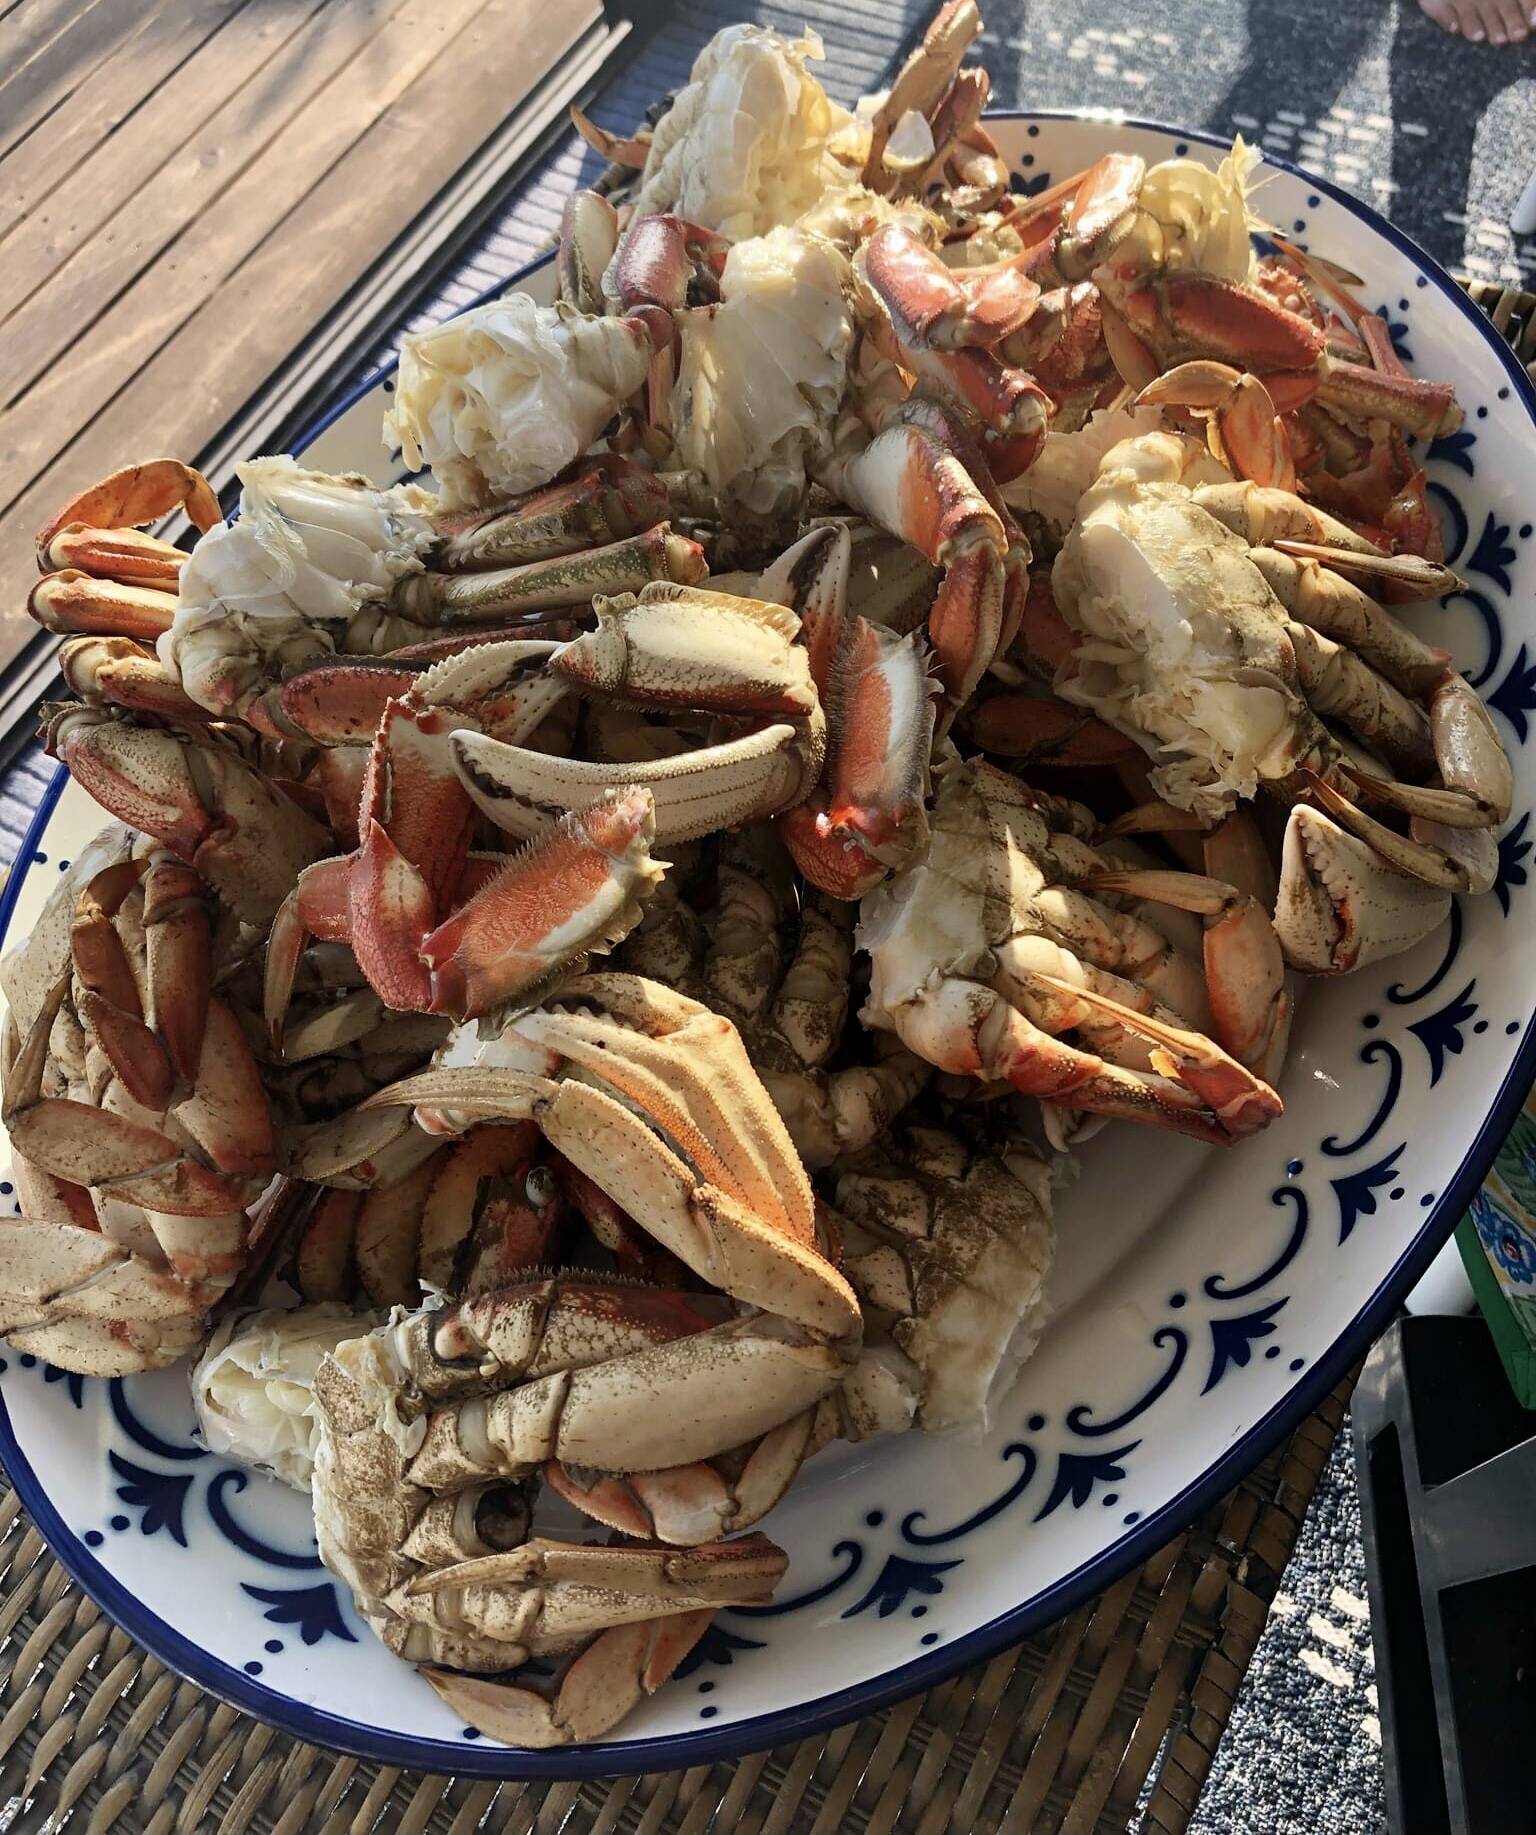 Photo by Emily Gilbert/Whidbey News-Times
This could be coming to a plate near you now that winter crab season is open through the end of the year.